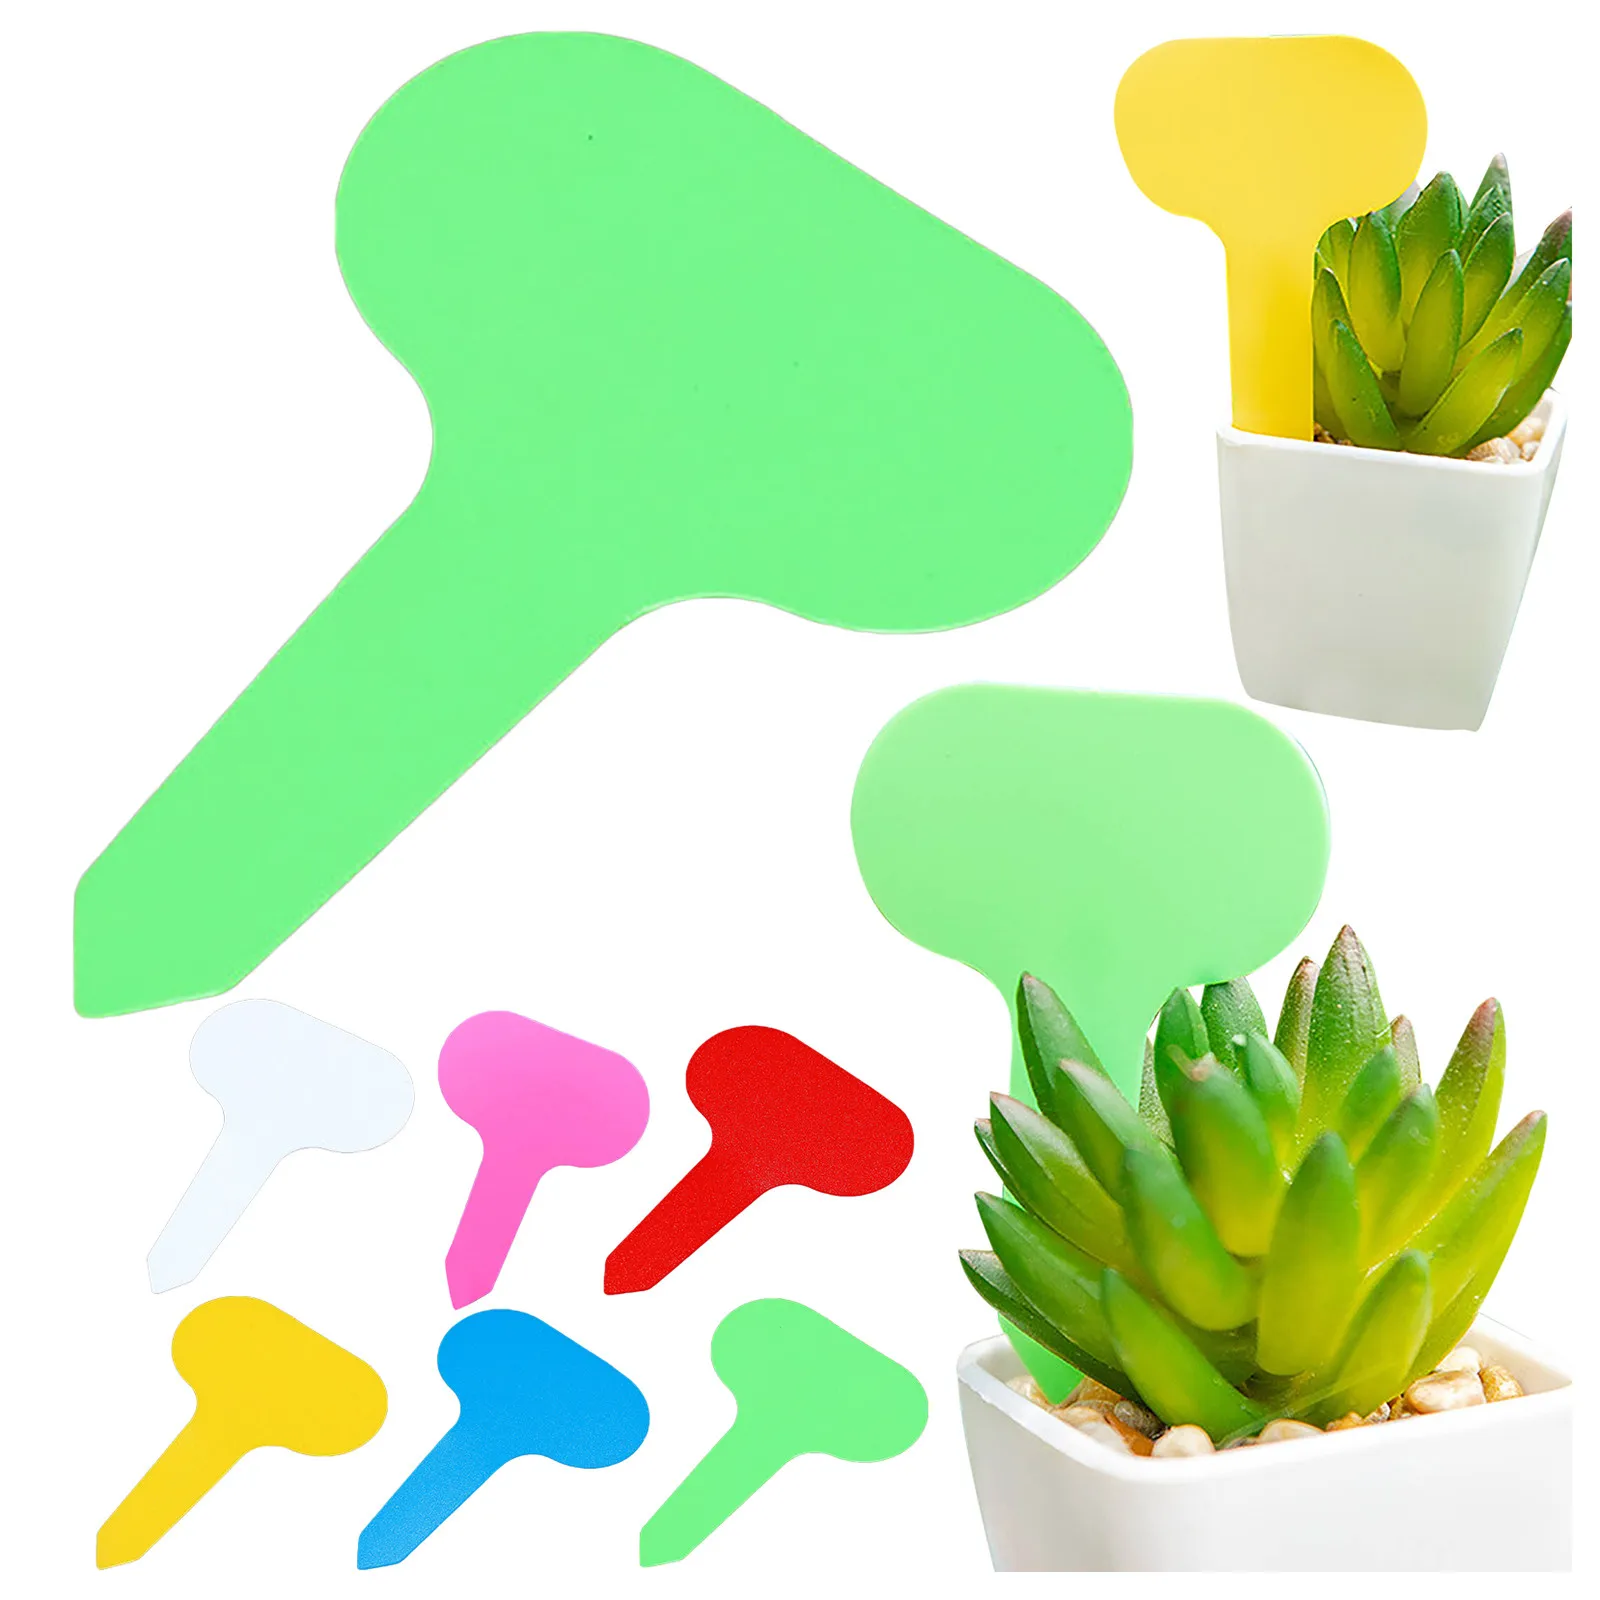 50pcs Garden Labels Plant Classification Sorting Sign Tag Ticket Plastic Writing Plate Board Plug In Card Colorful